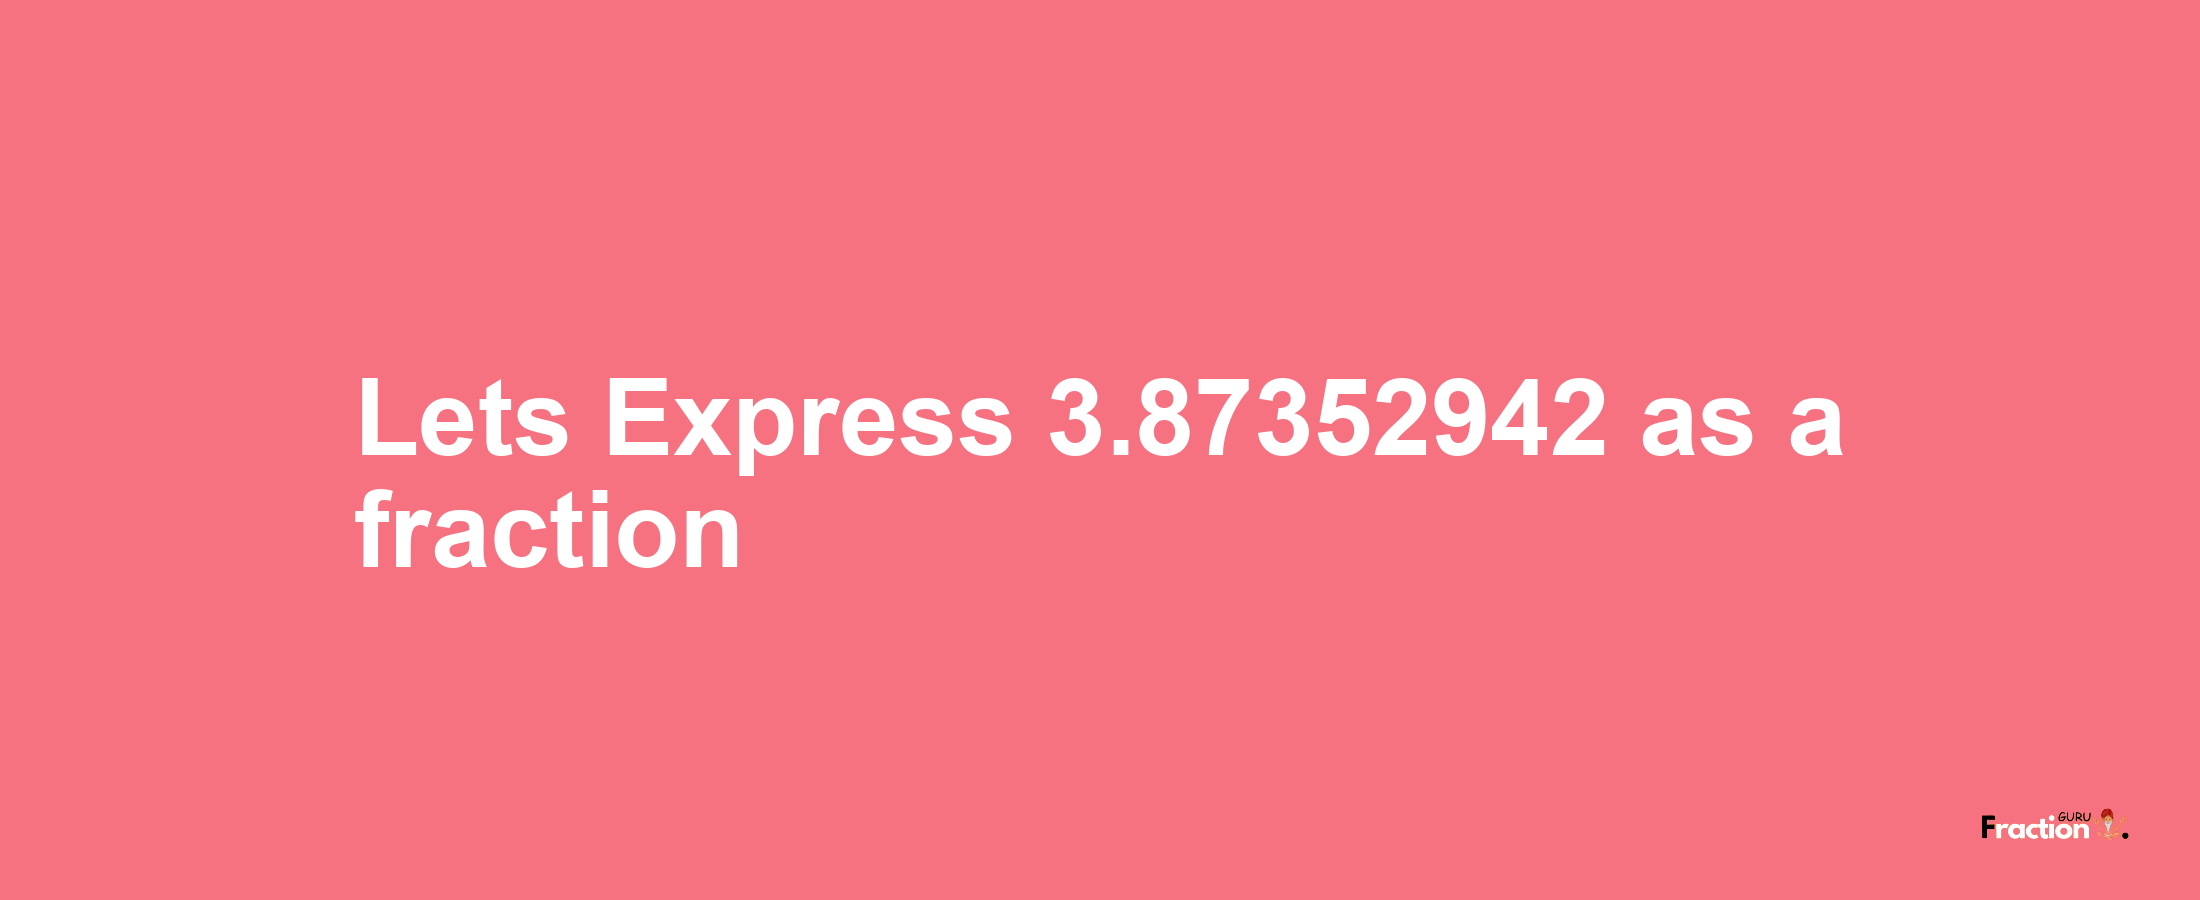 Lets Express 3.87352942 as afraction